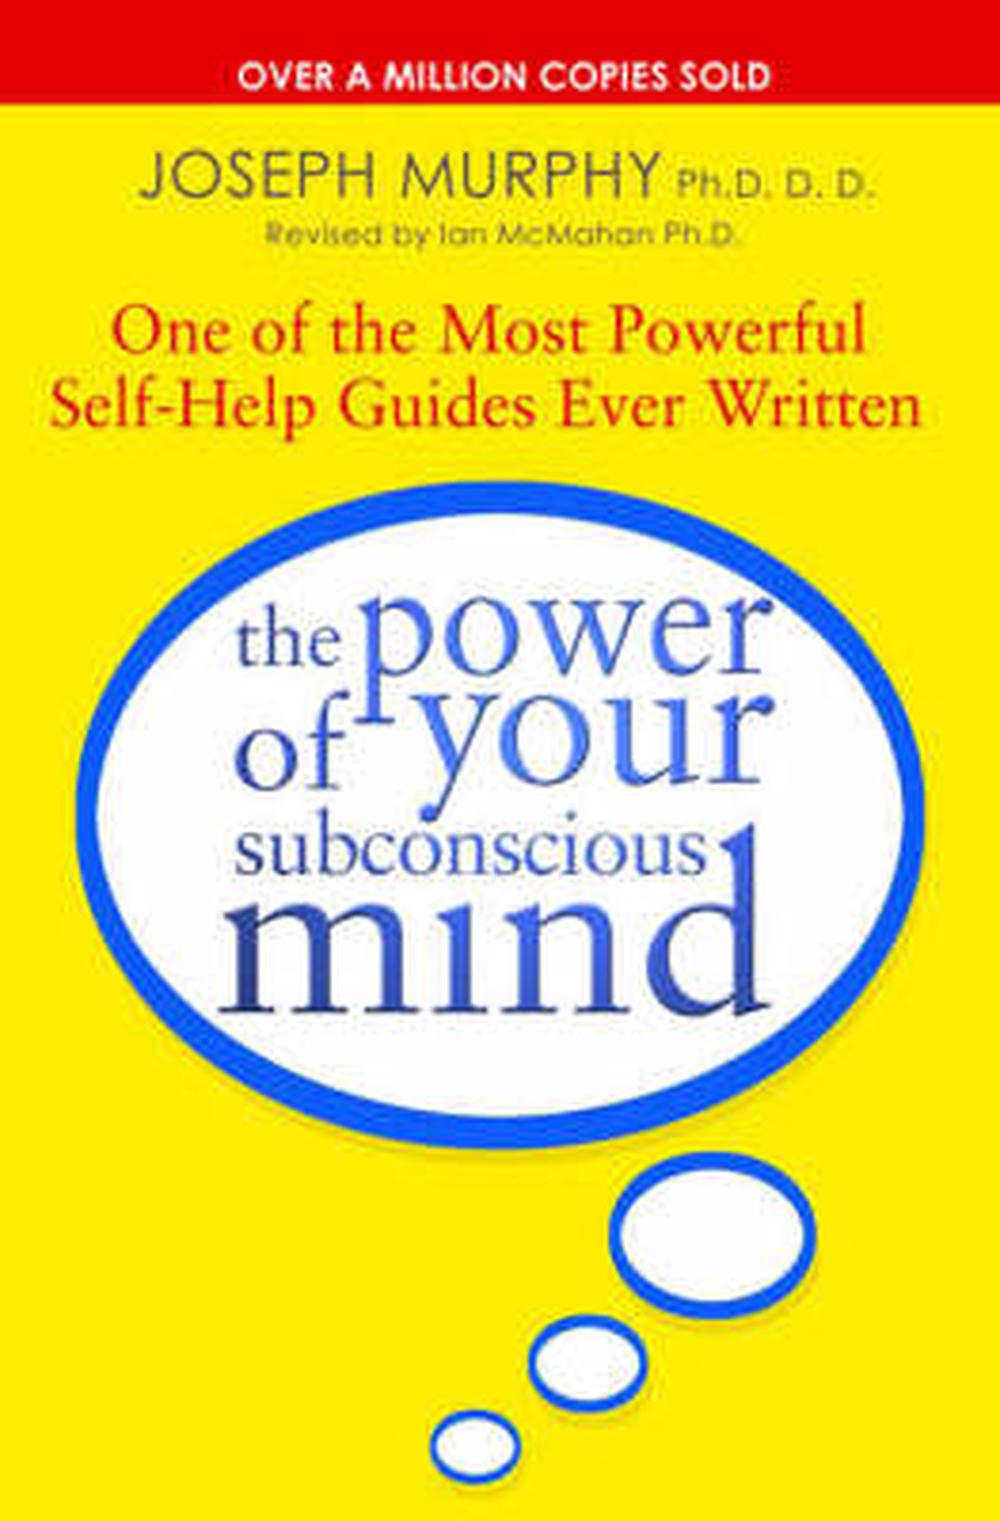 the power of subconscious mind by joseph murphy